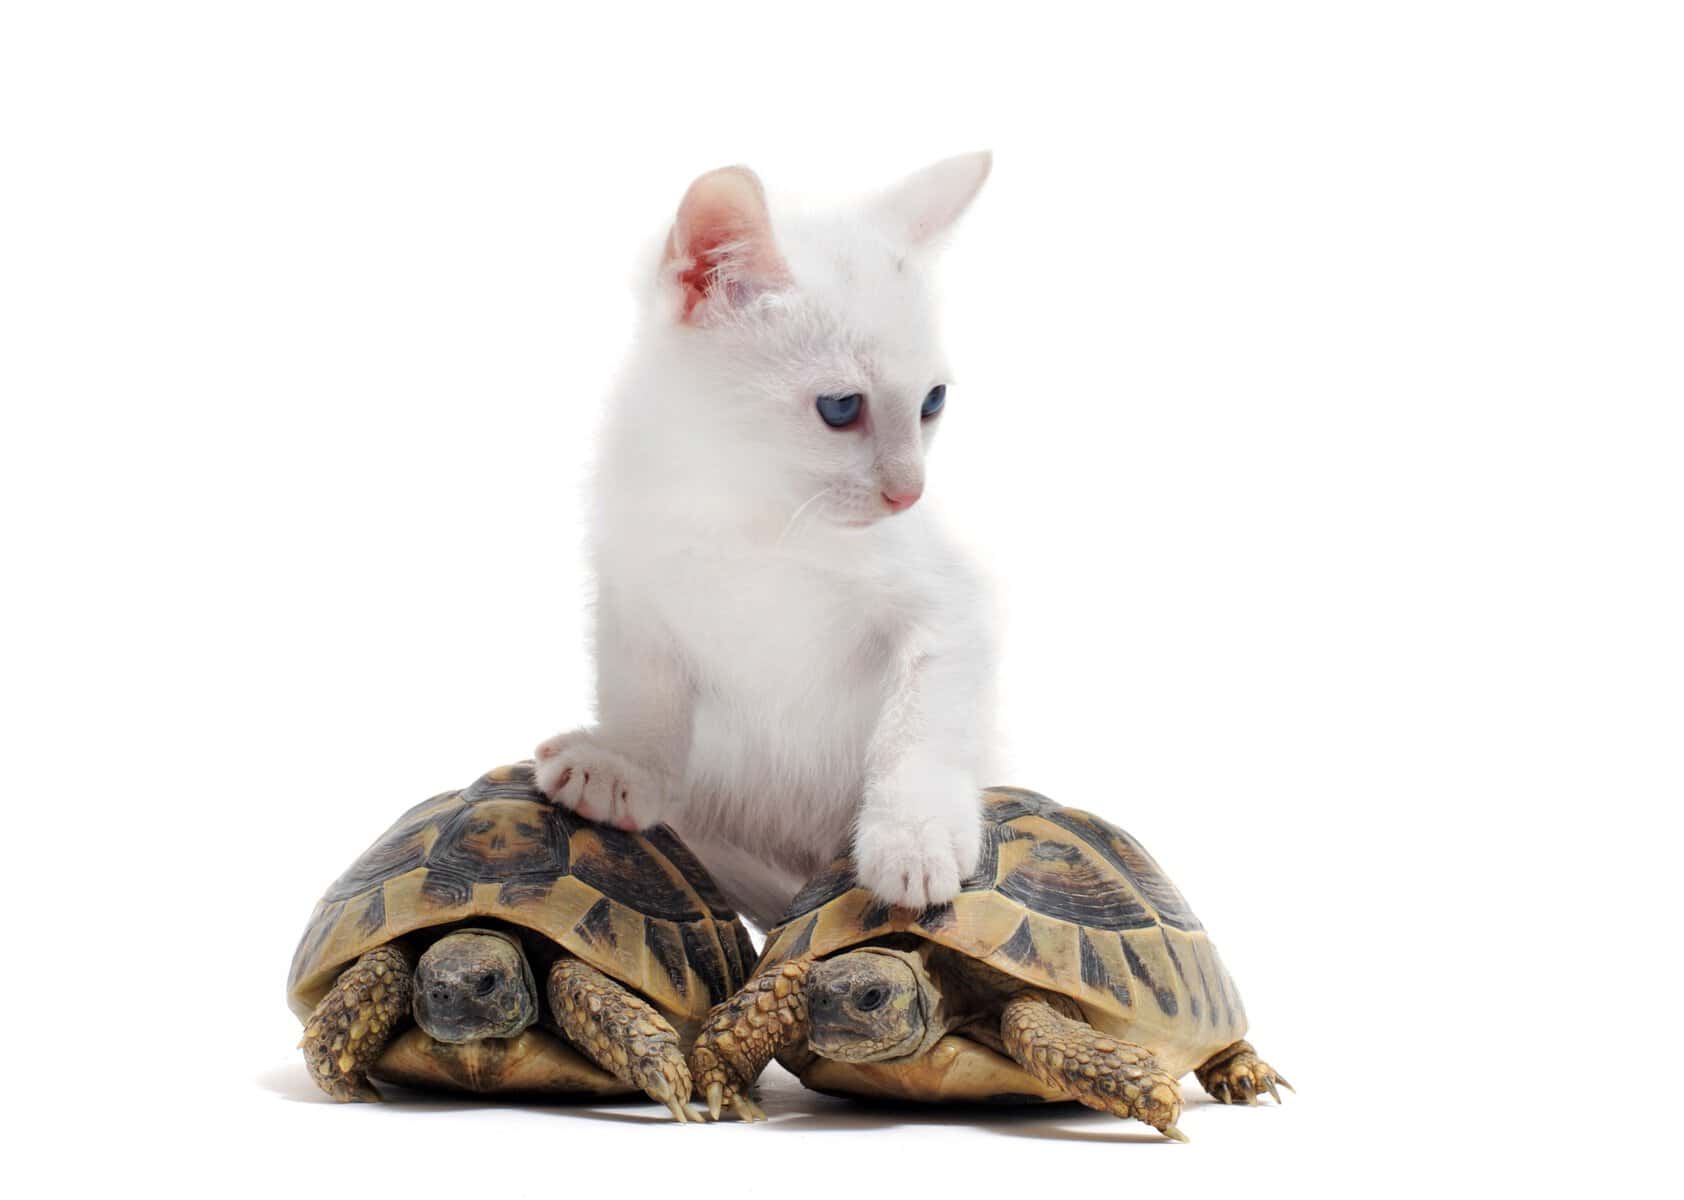 Do cats eat turtles - a white kitten on top of two turtles, isolated on a white background